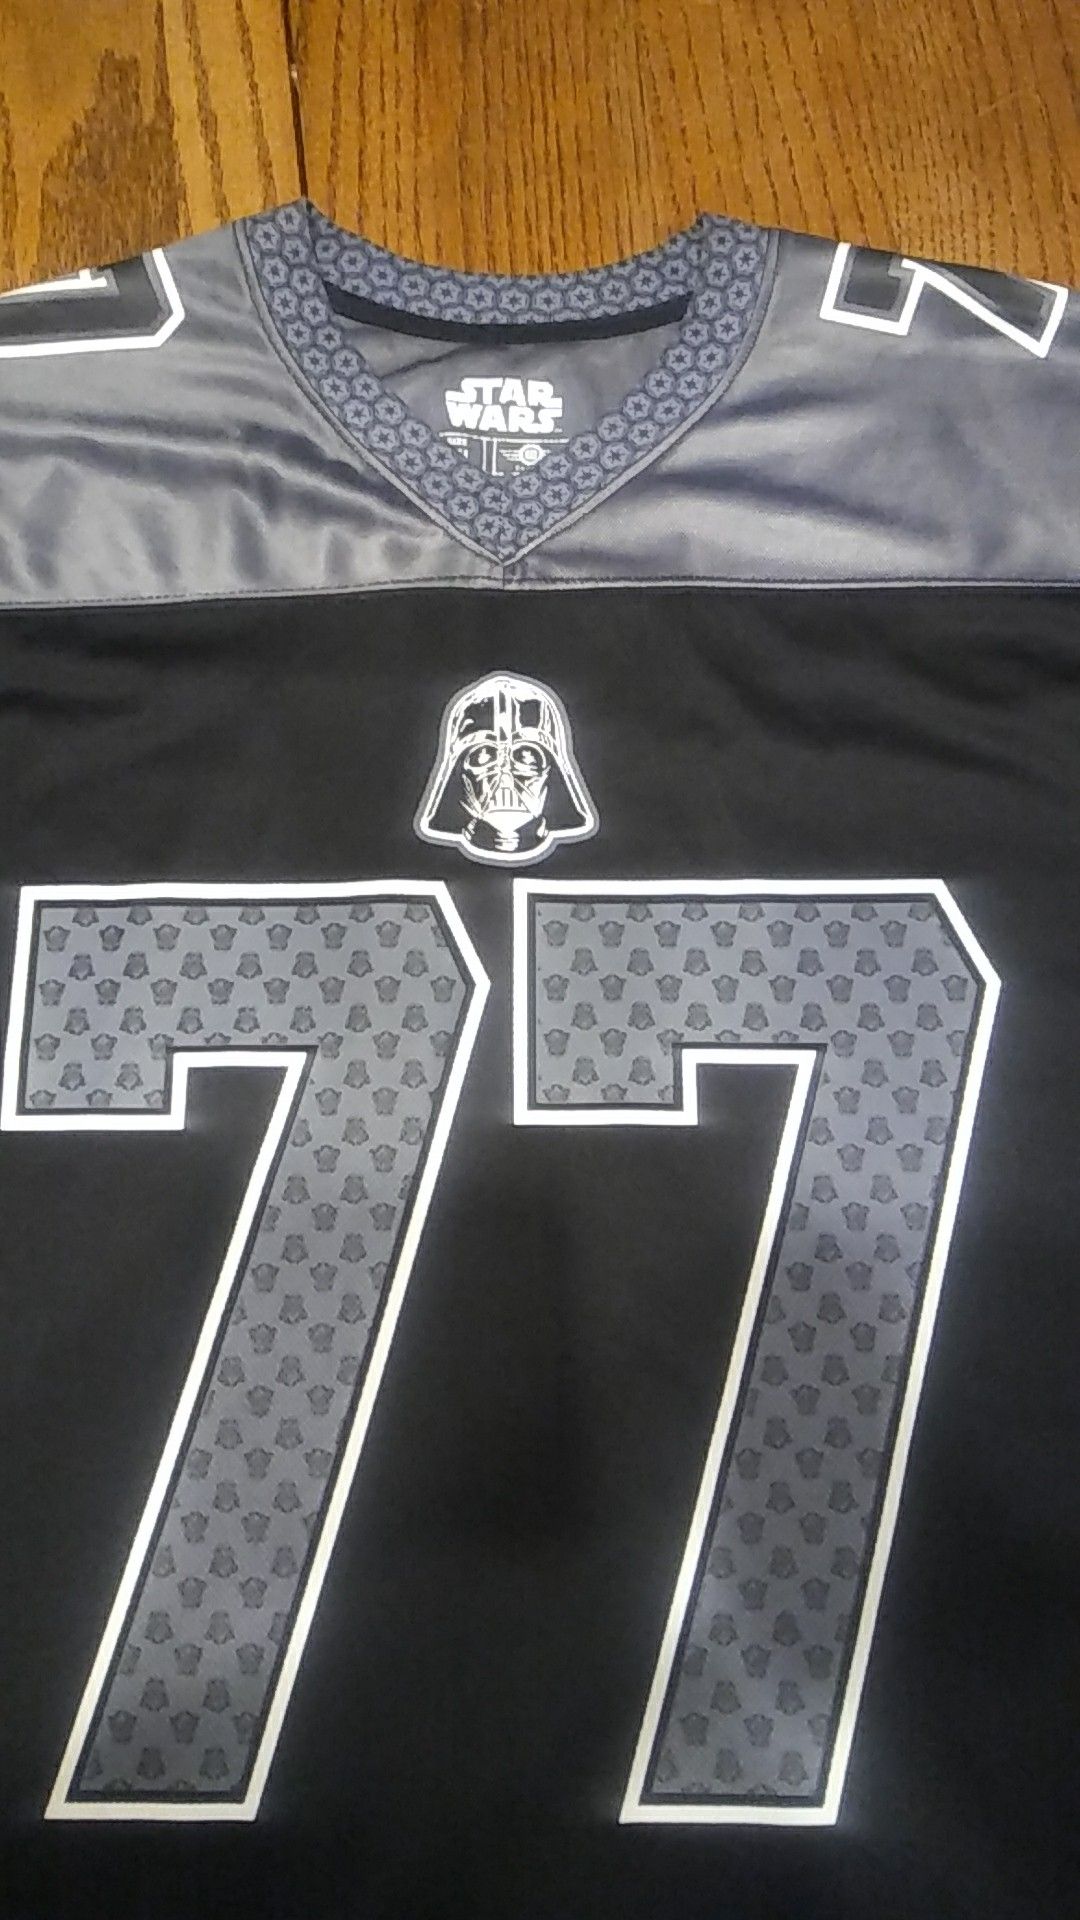 Darth Vader # 77 Star Wars Jersey. XL. Used but in good condition